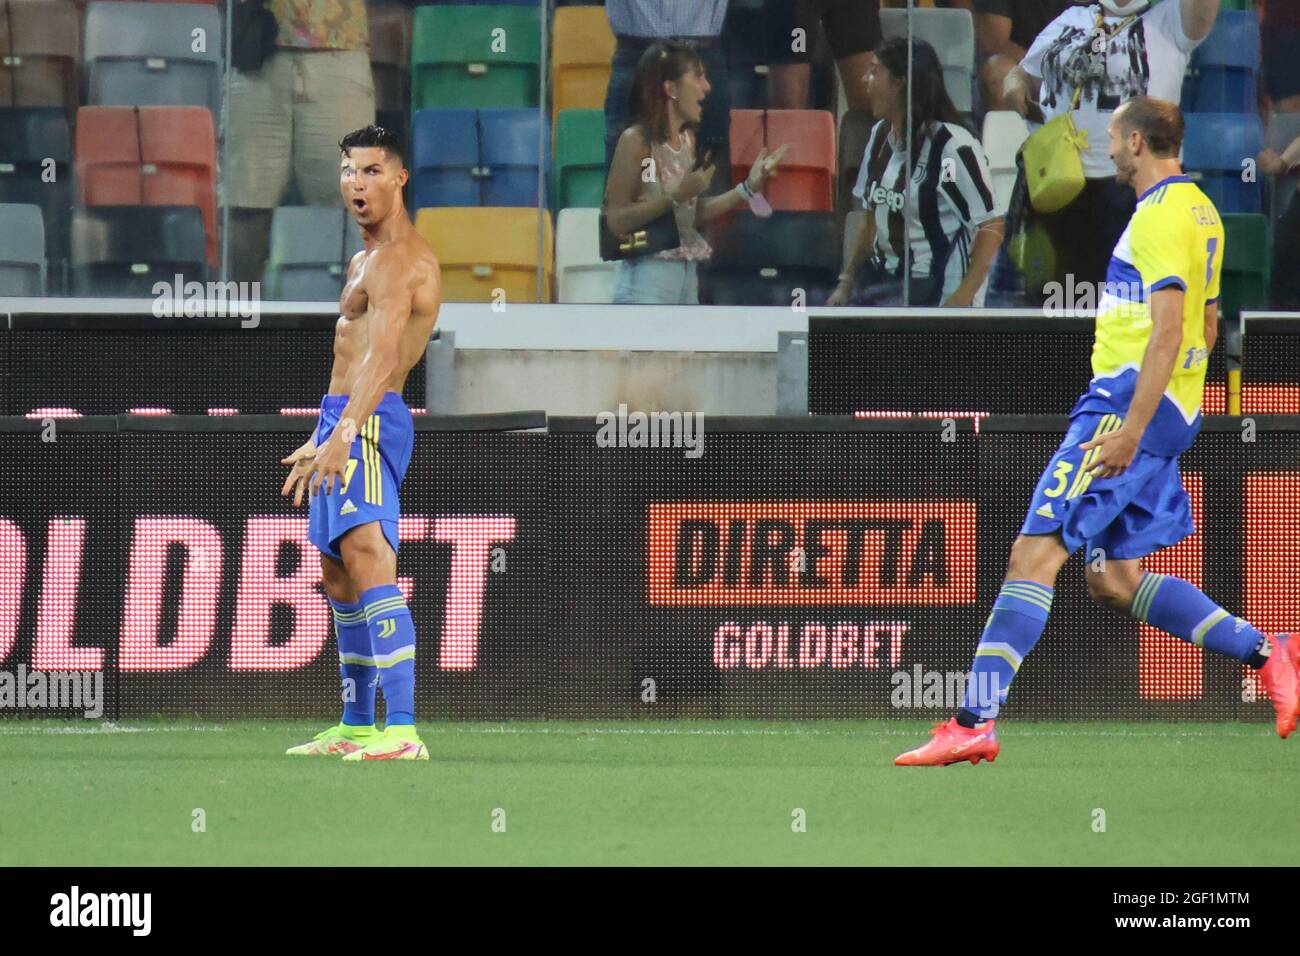 Udine. 23rd Aug, 2021. FC Juventus' Cristiano Ronaldo (L) celebrates his  goal before it is disallowed during a Serie A football match between  Udinese and FC Juventus in Udine, Italy, Aug 22,